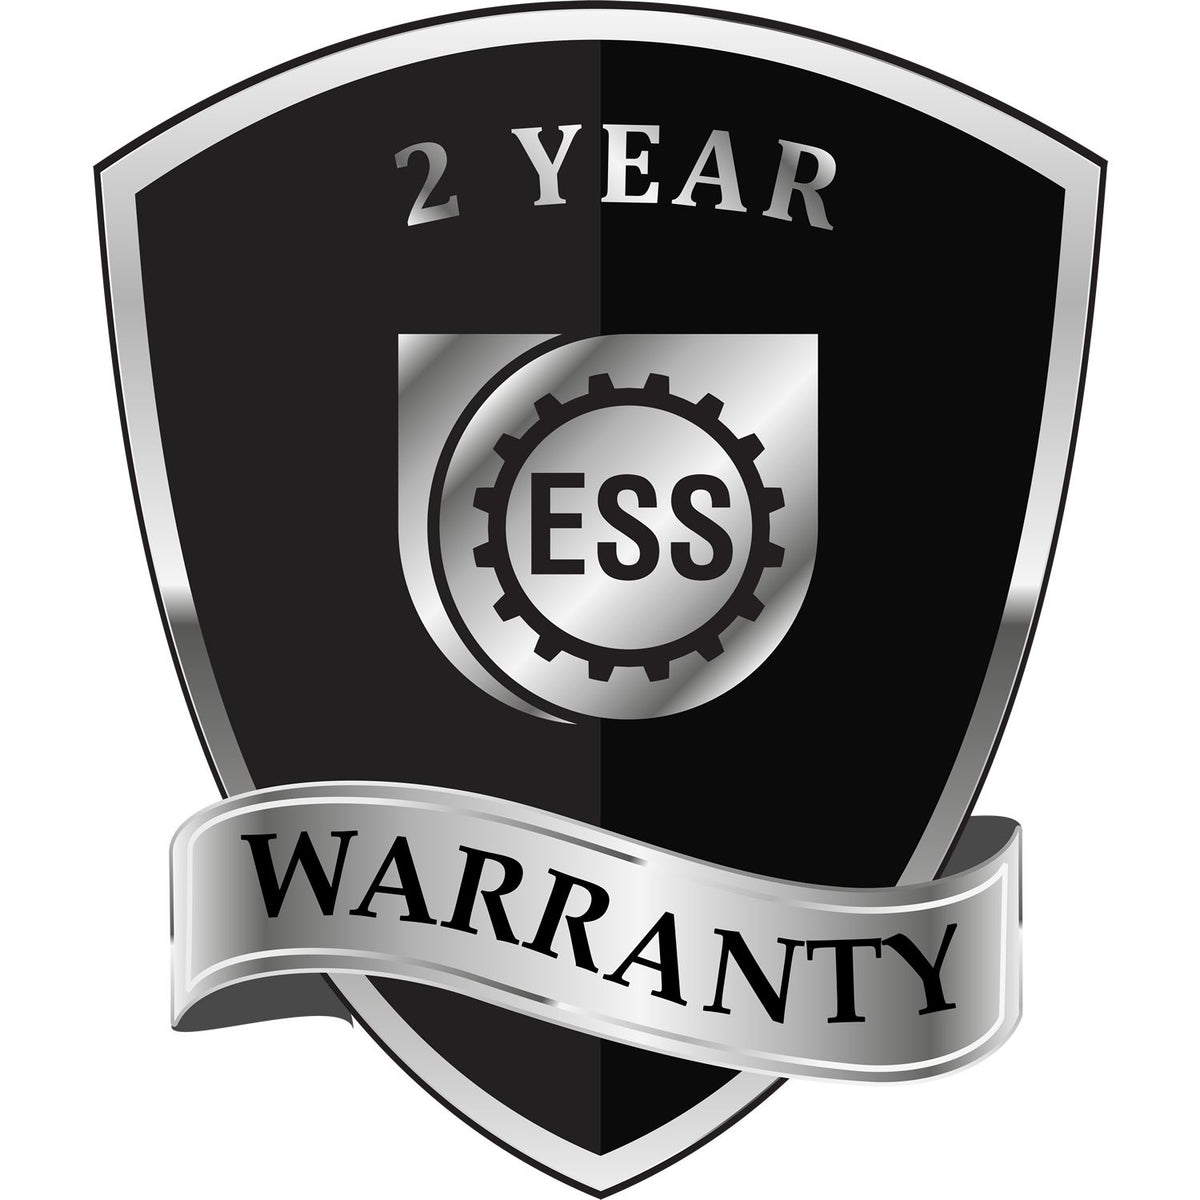 A black and silver badge or emblem showing warranty information for the Hybrid Connecticut Landscape Architect Seal